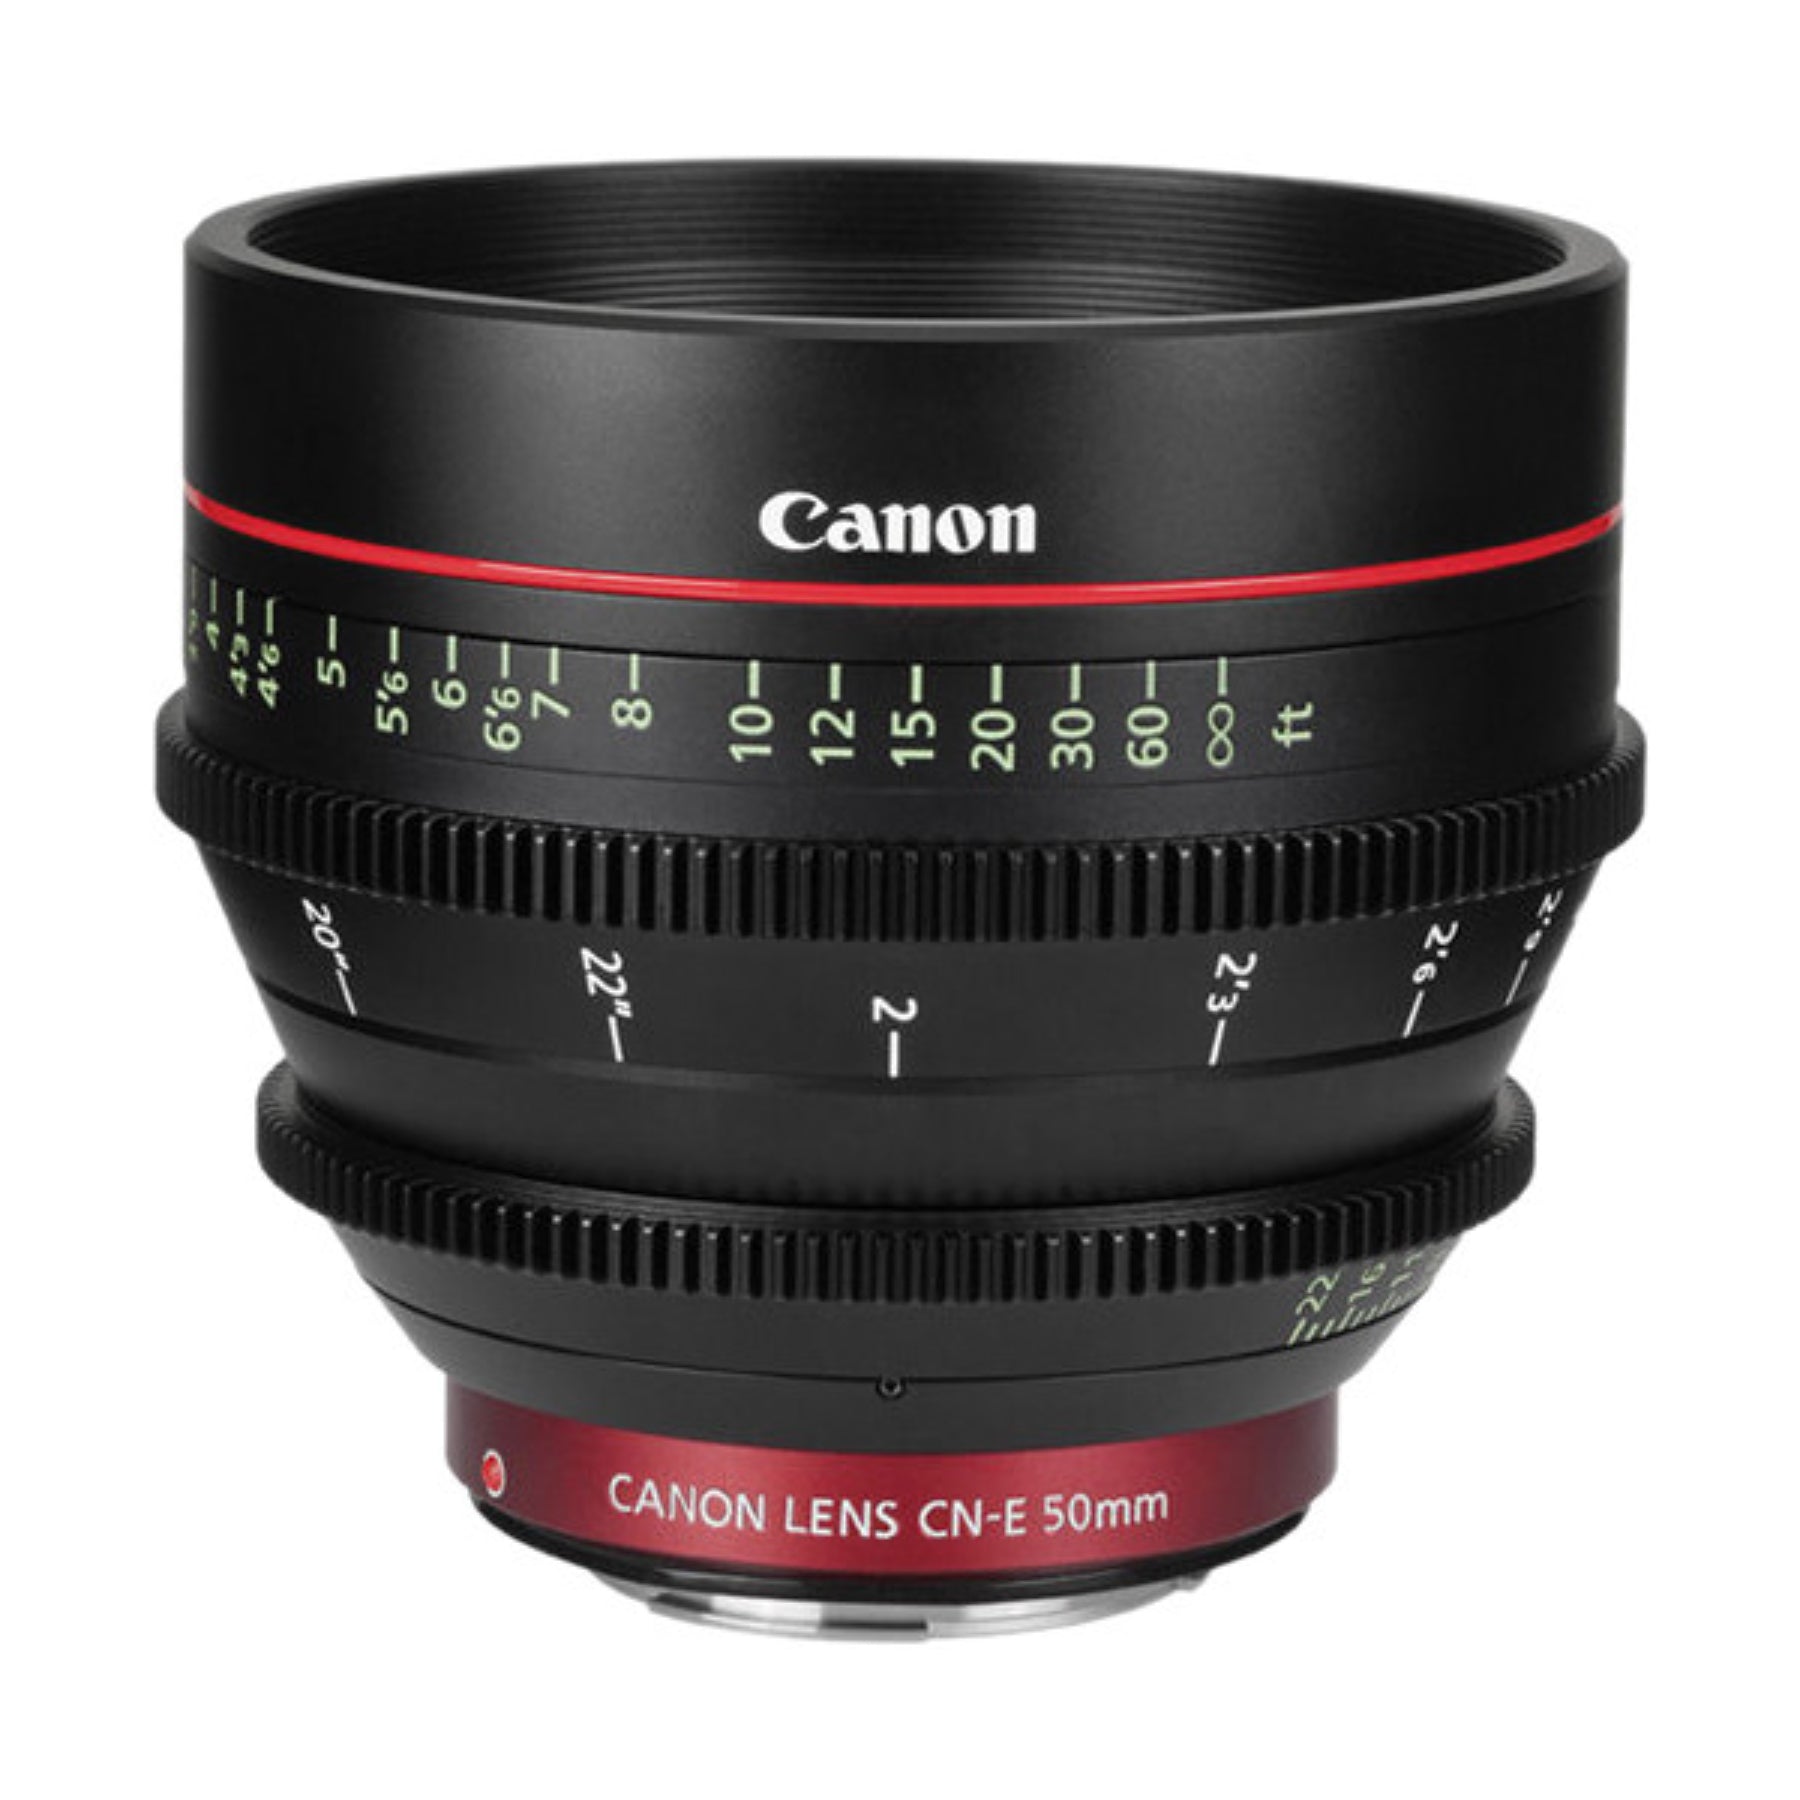 Canon CN-E 50mm T 1.3 EF lens for hire